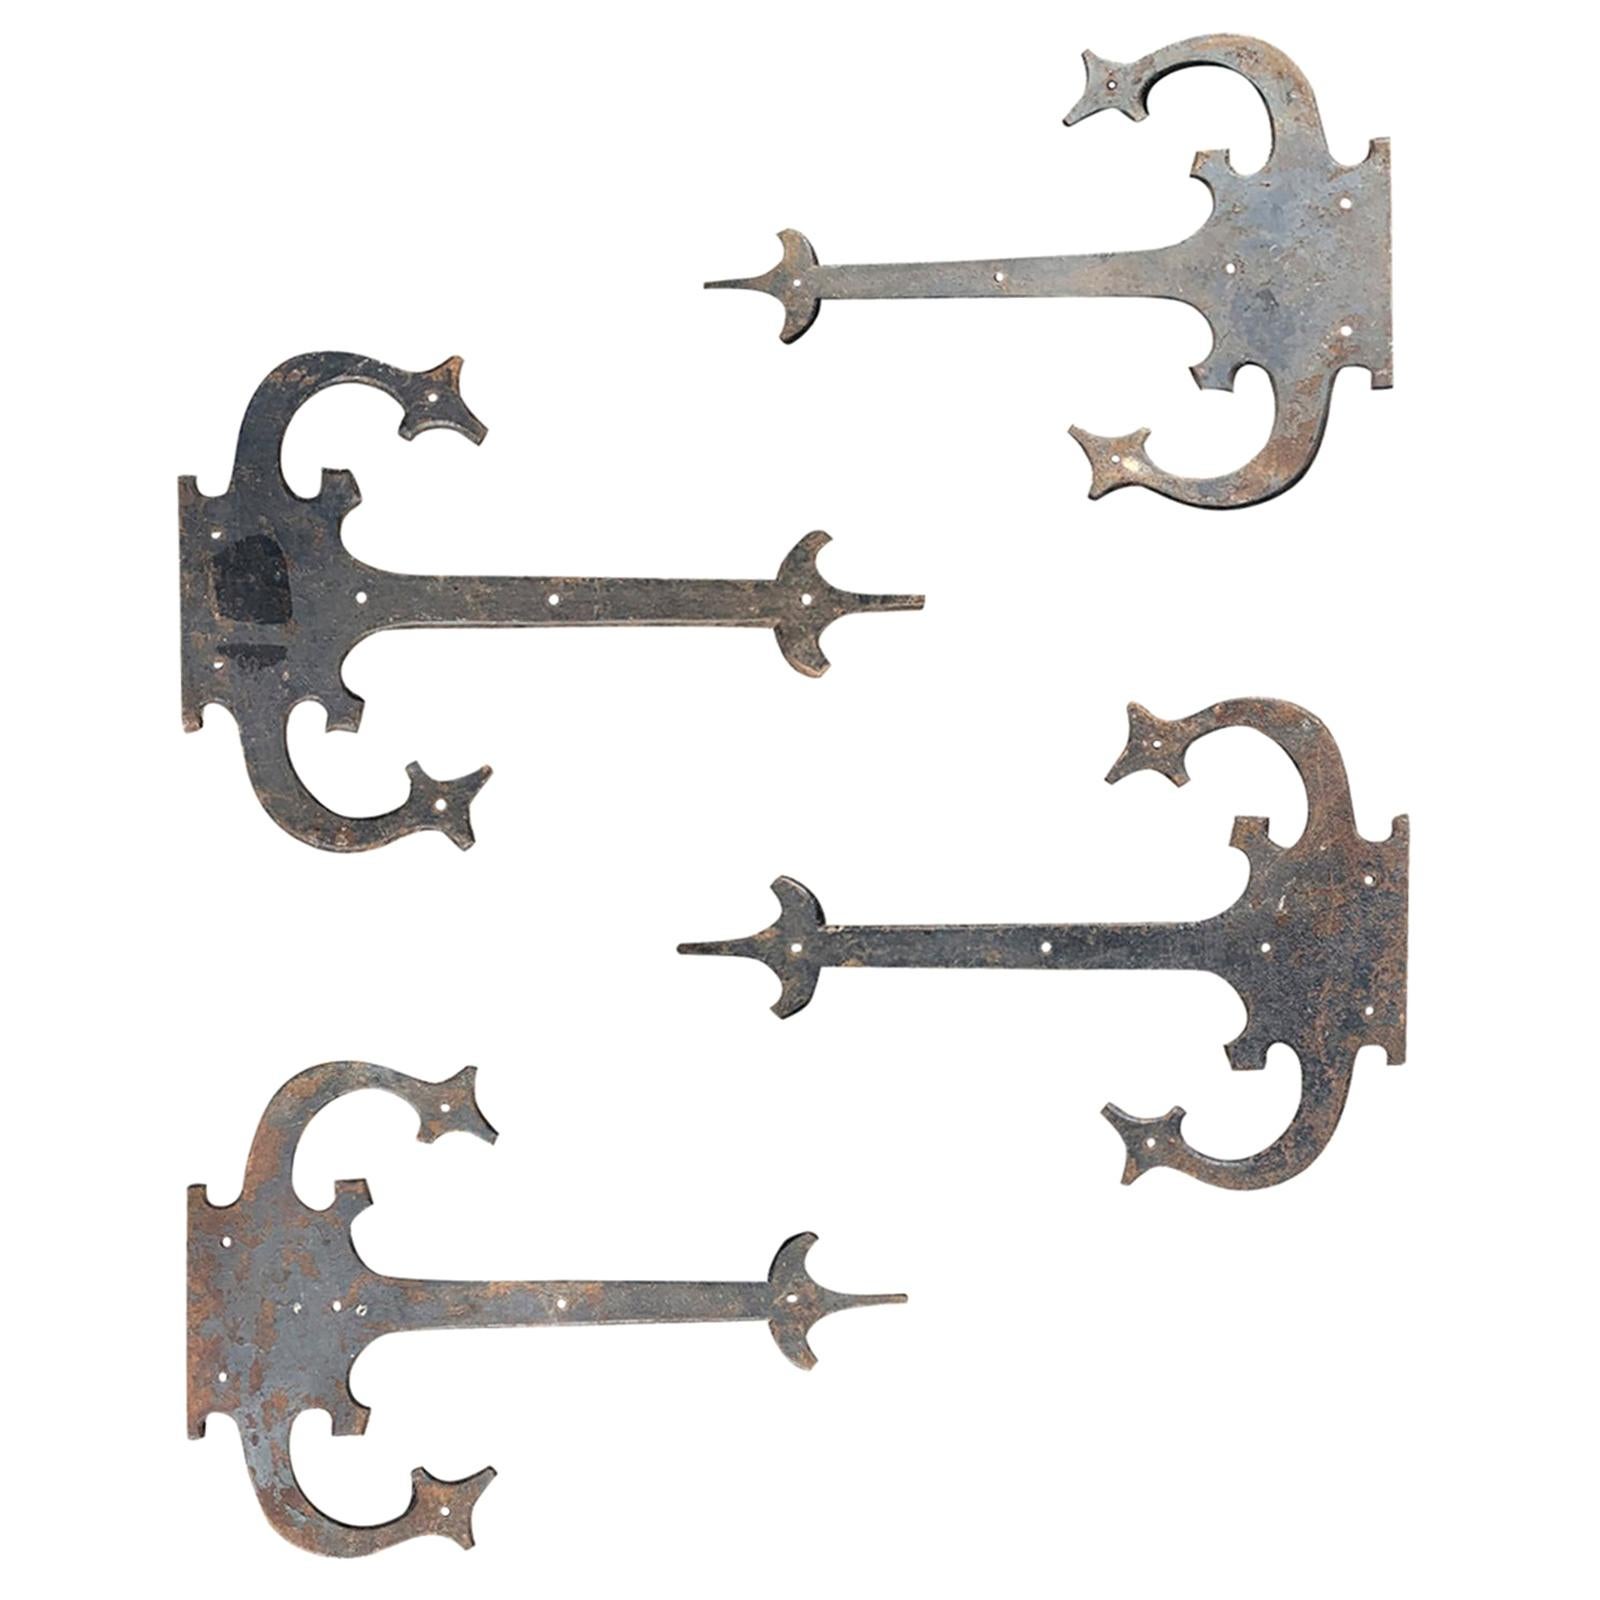 Set of ‘4’ 20th Century Hand-Forged Wrought Iron Architectural Door Hinges